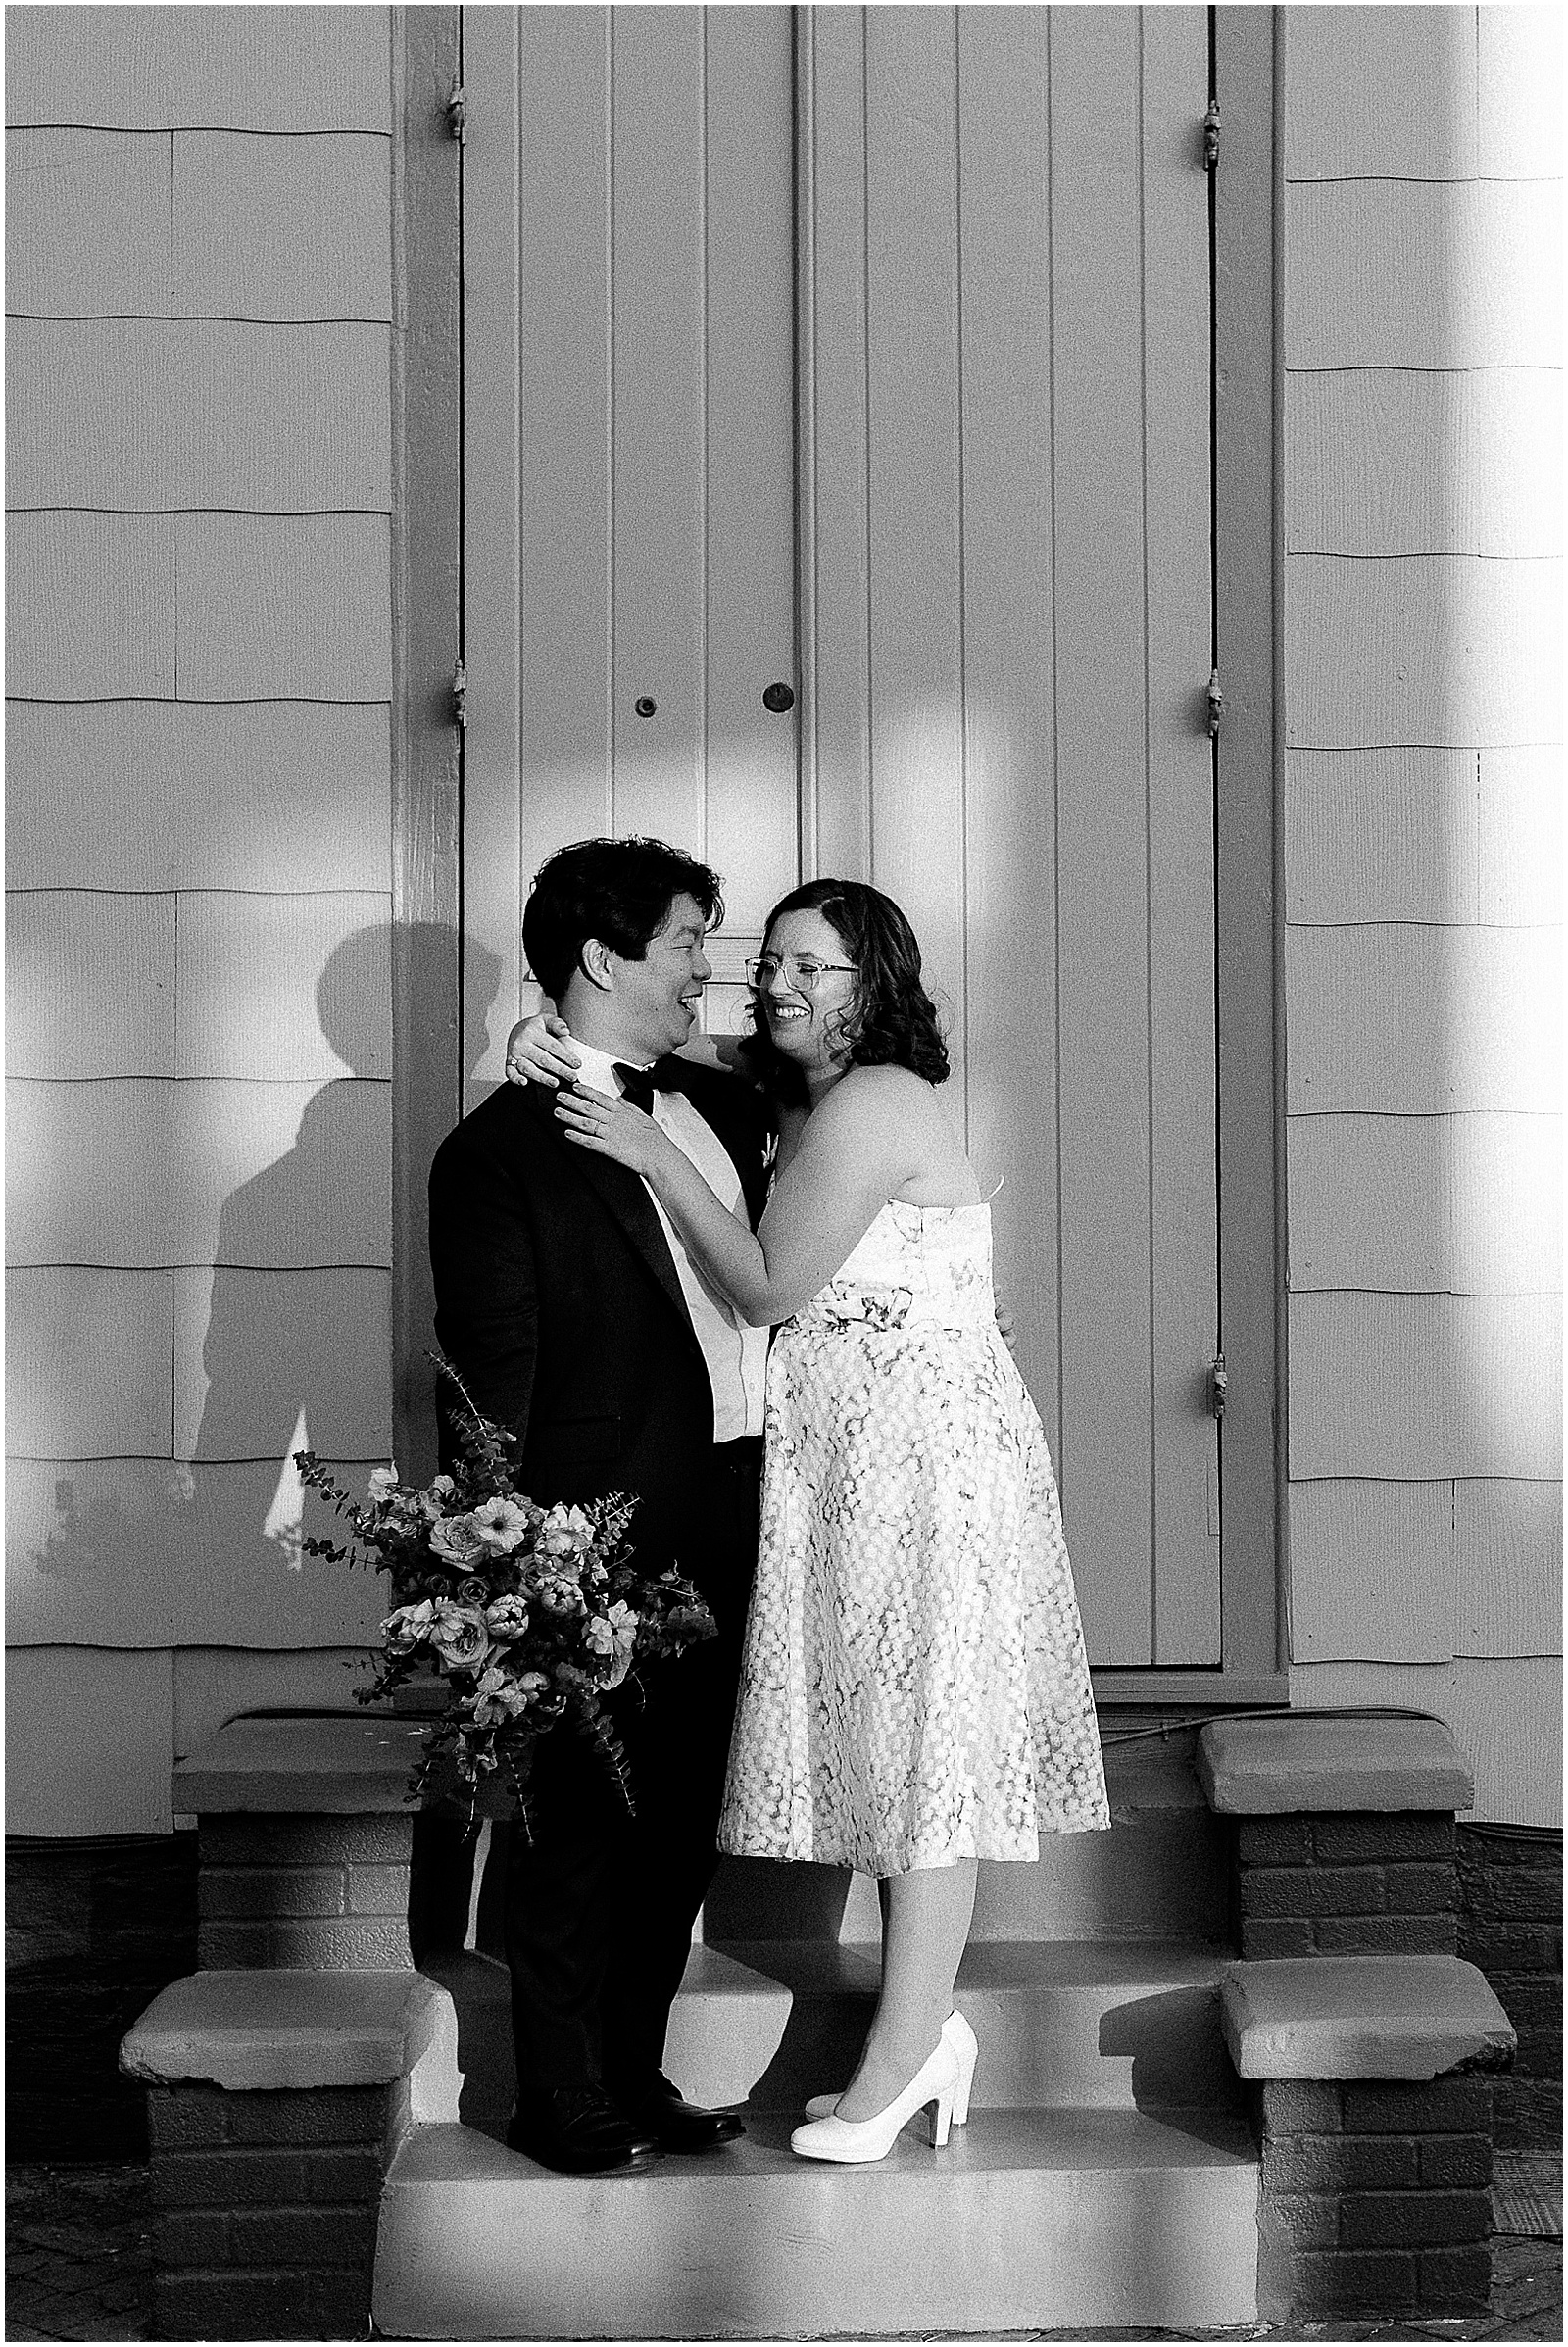 A bride and groom stand in front of a New Orleans house holding a bridal bouquet.